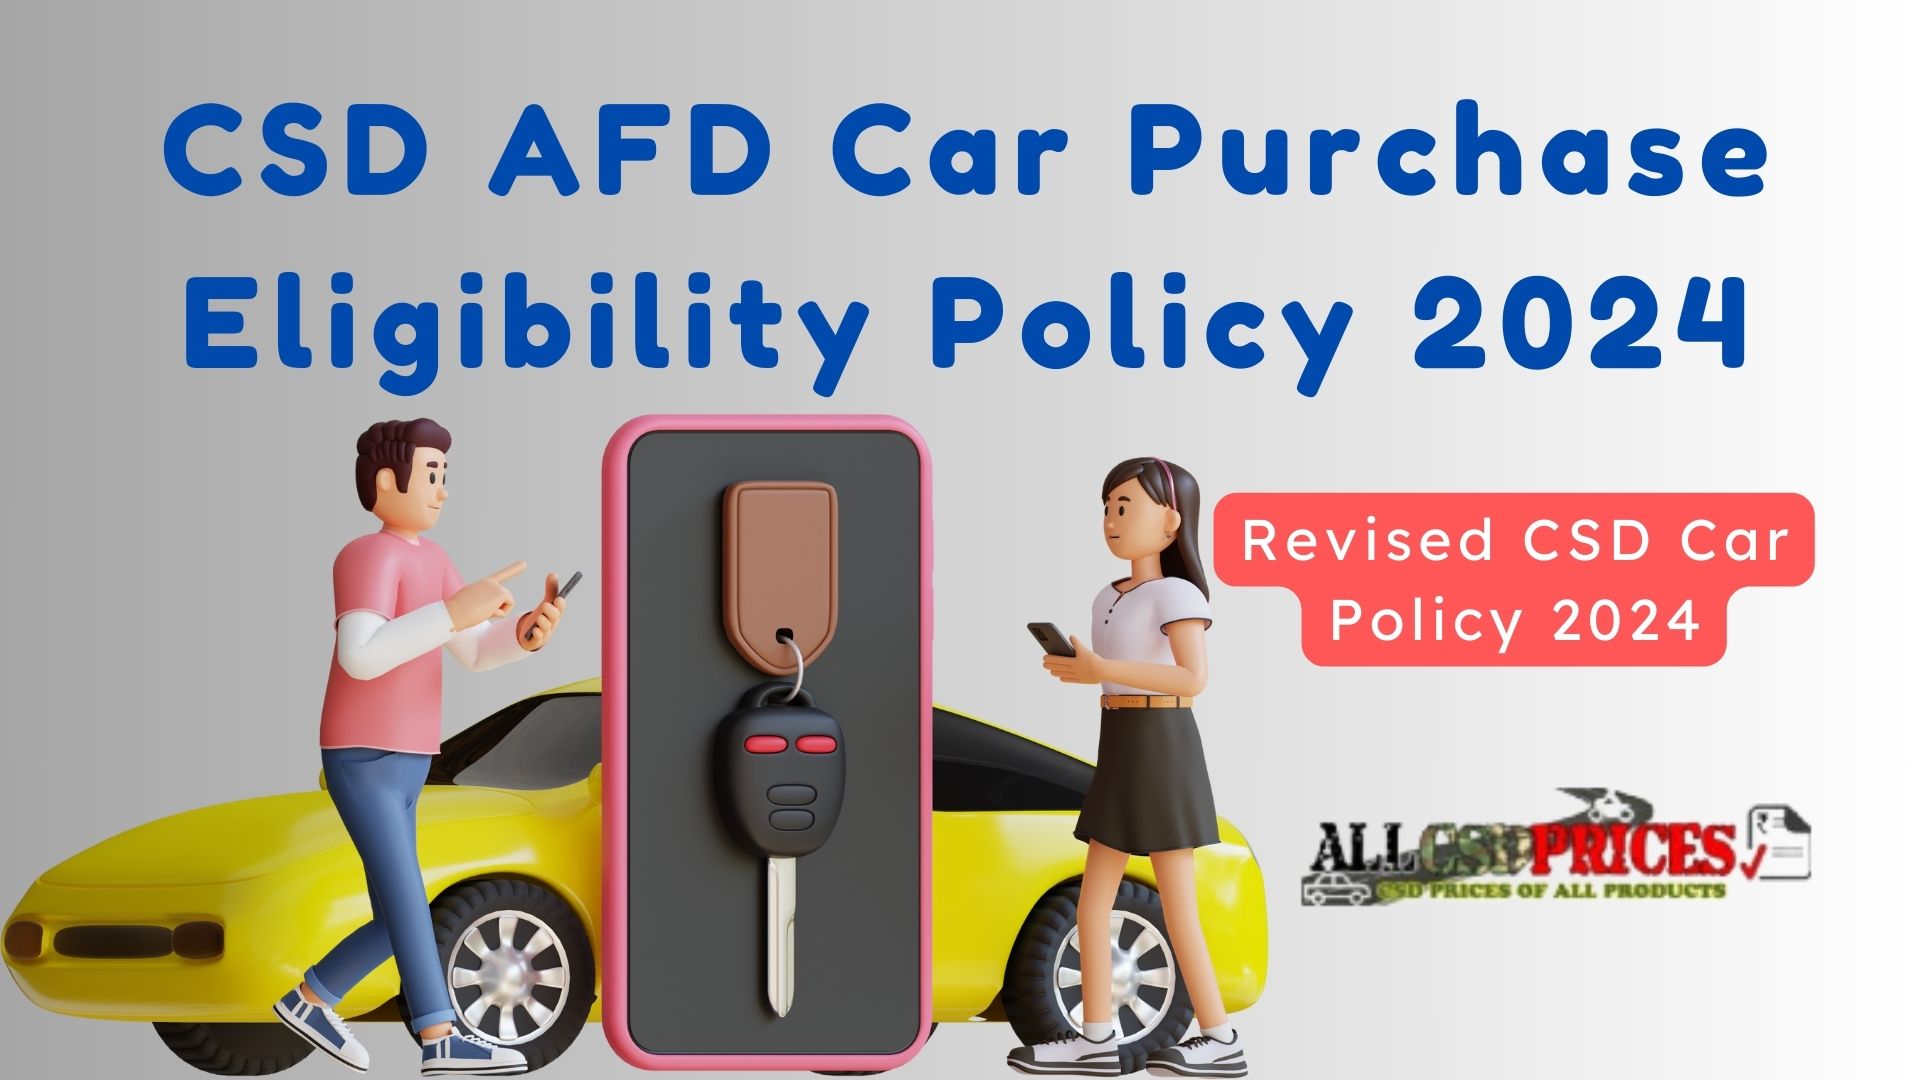 CSD AFD Car Purchase Eligibility Policy 2024 PDF